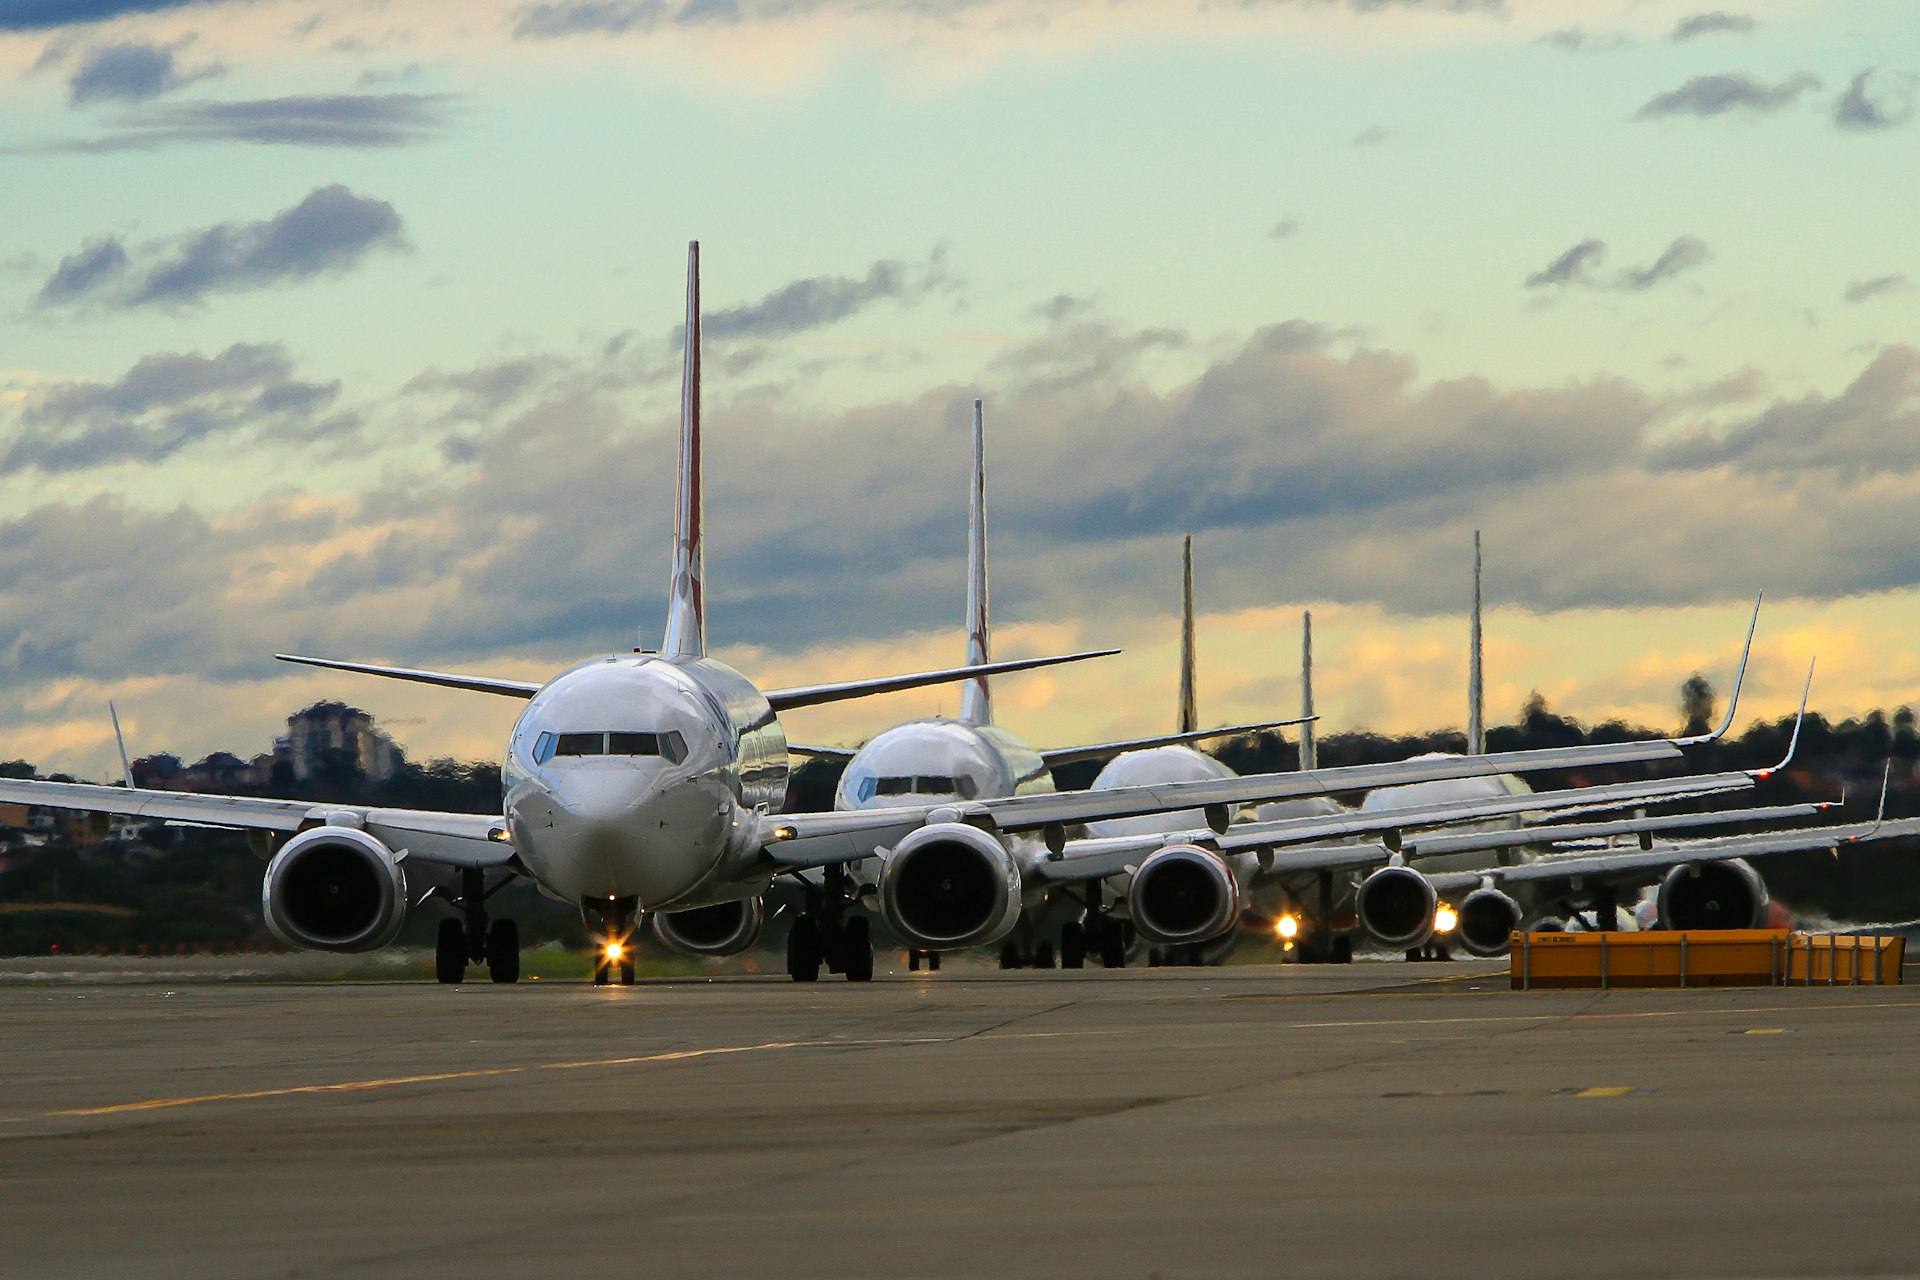 Jet airliners lined up at dusk on runway